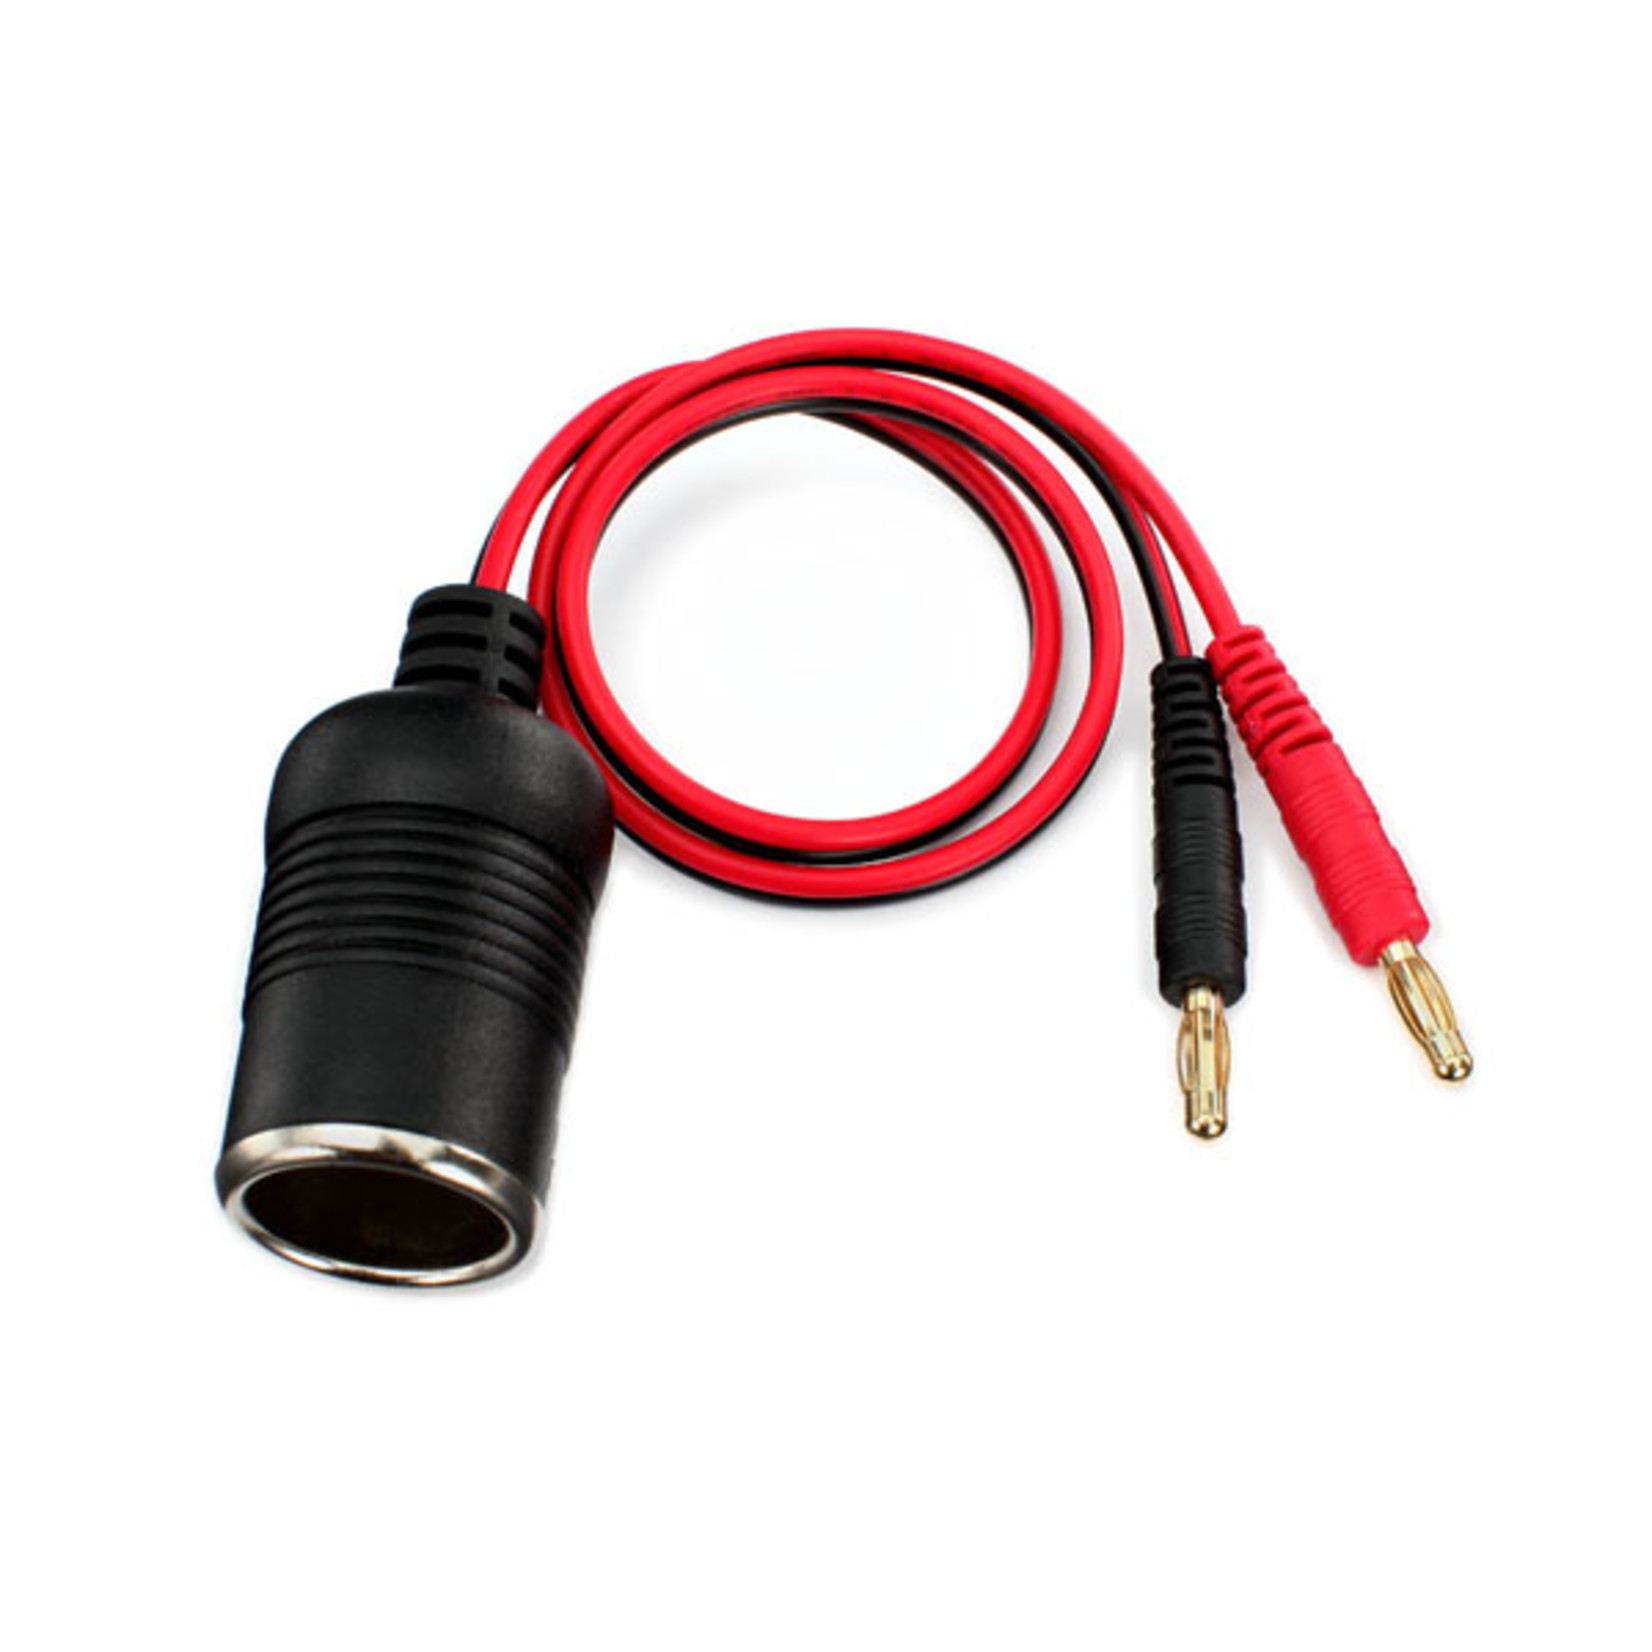 Traxxas 2980 - Adapter, DC (female) to bullet connectors